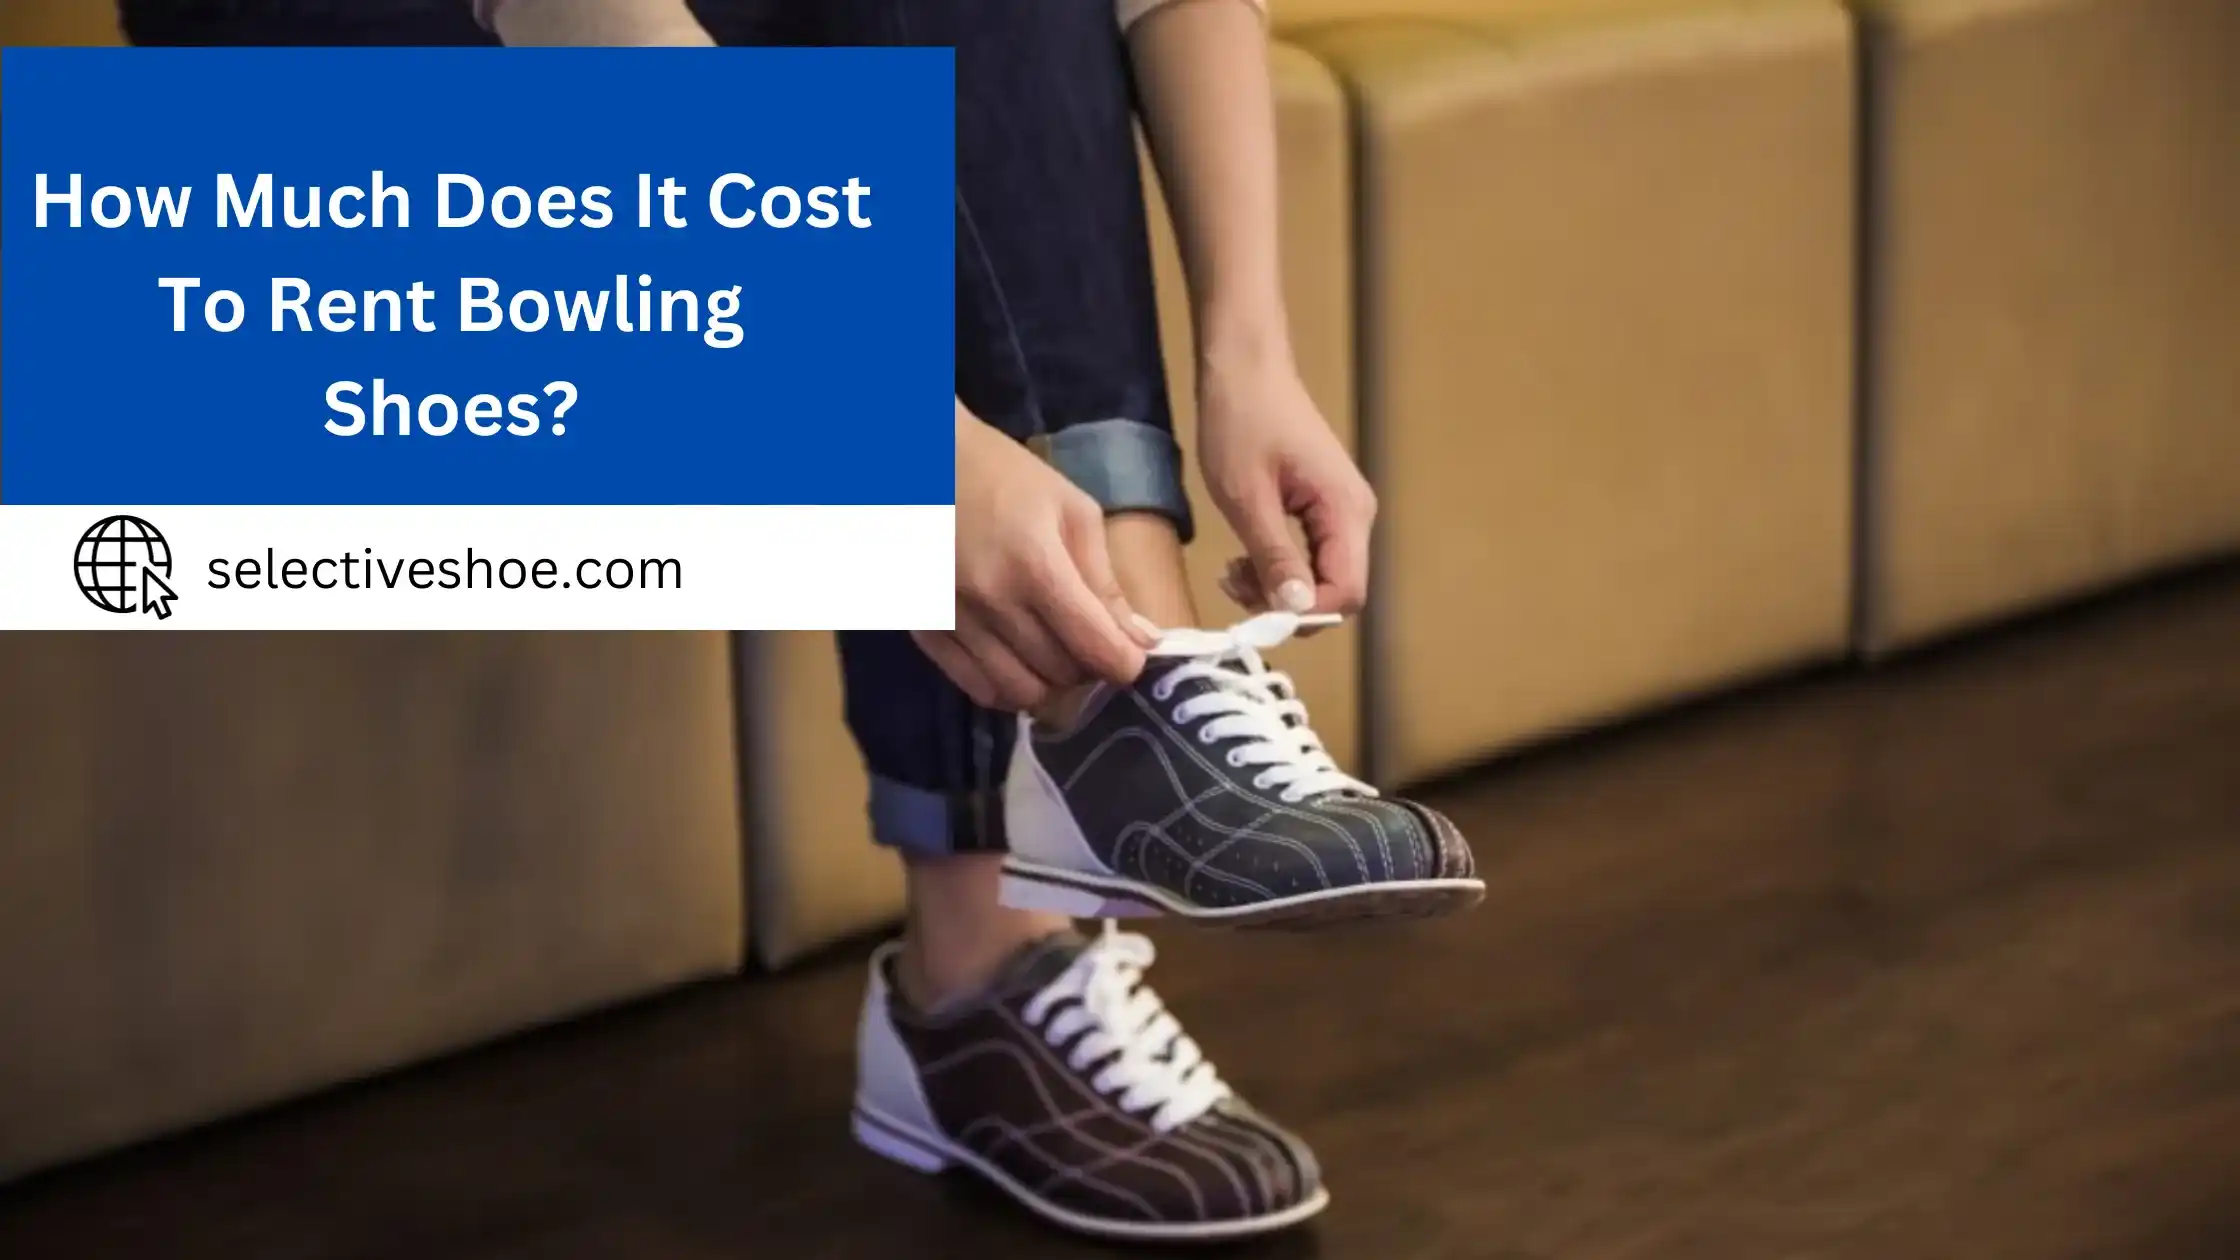 How Much Does It Cost To Rent Bowling Shoes